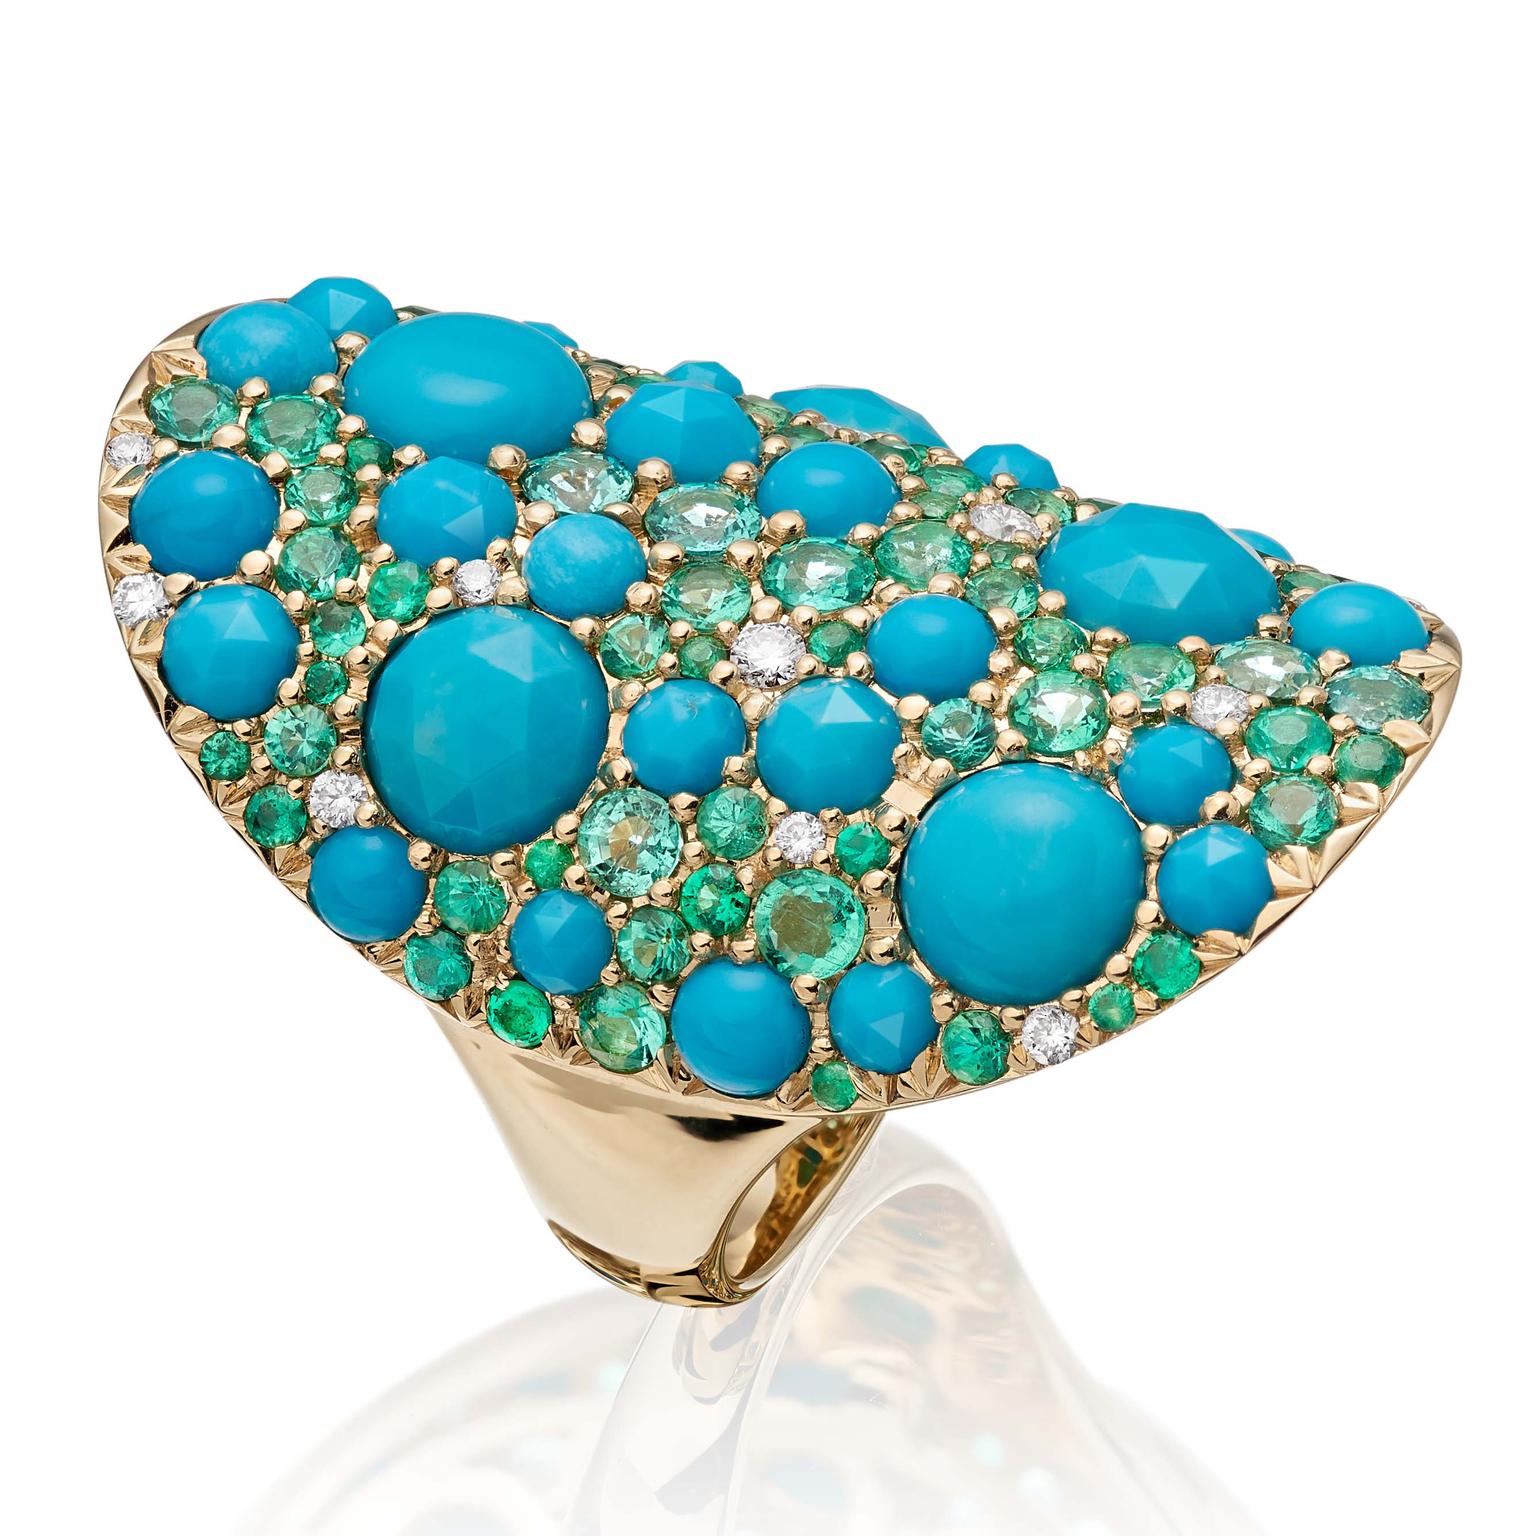 Vault ring with turquoise from Robinson Pelham